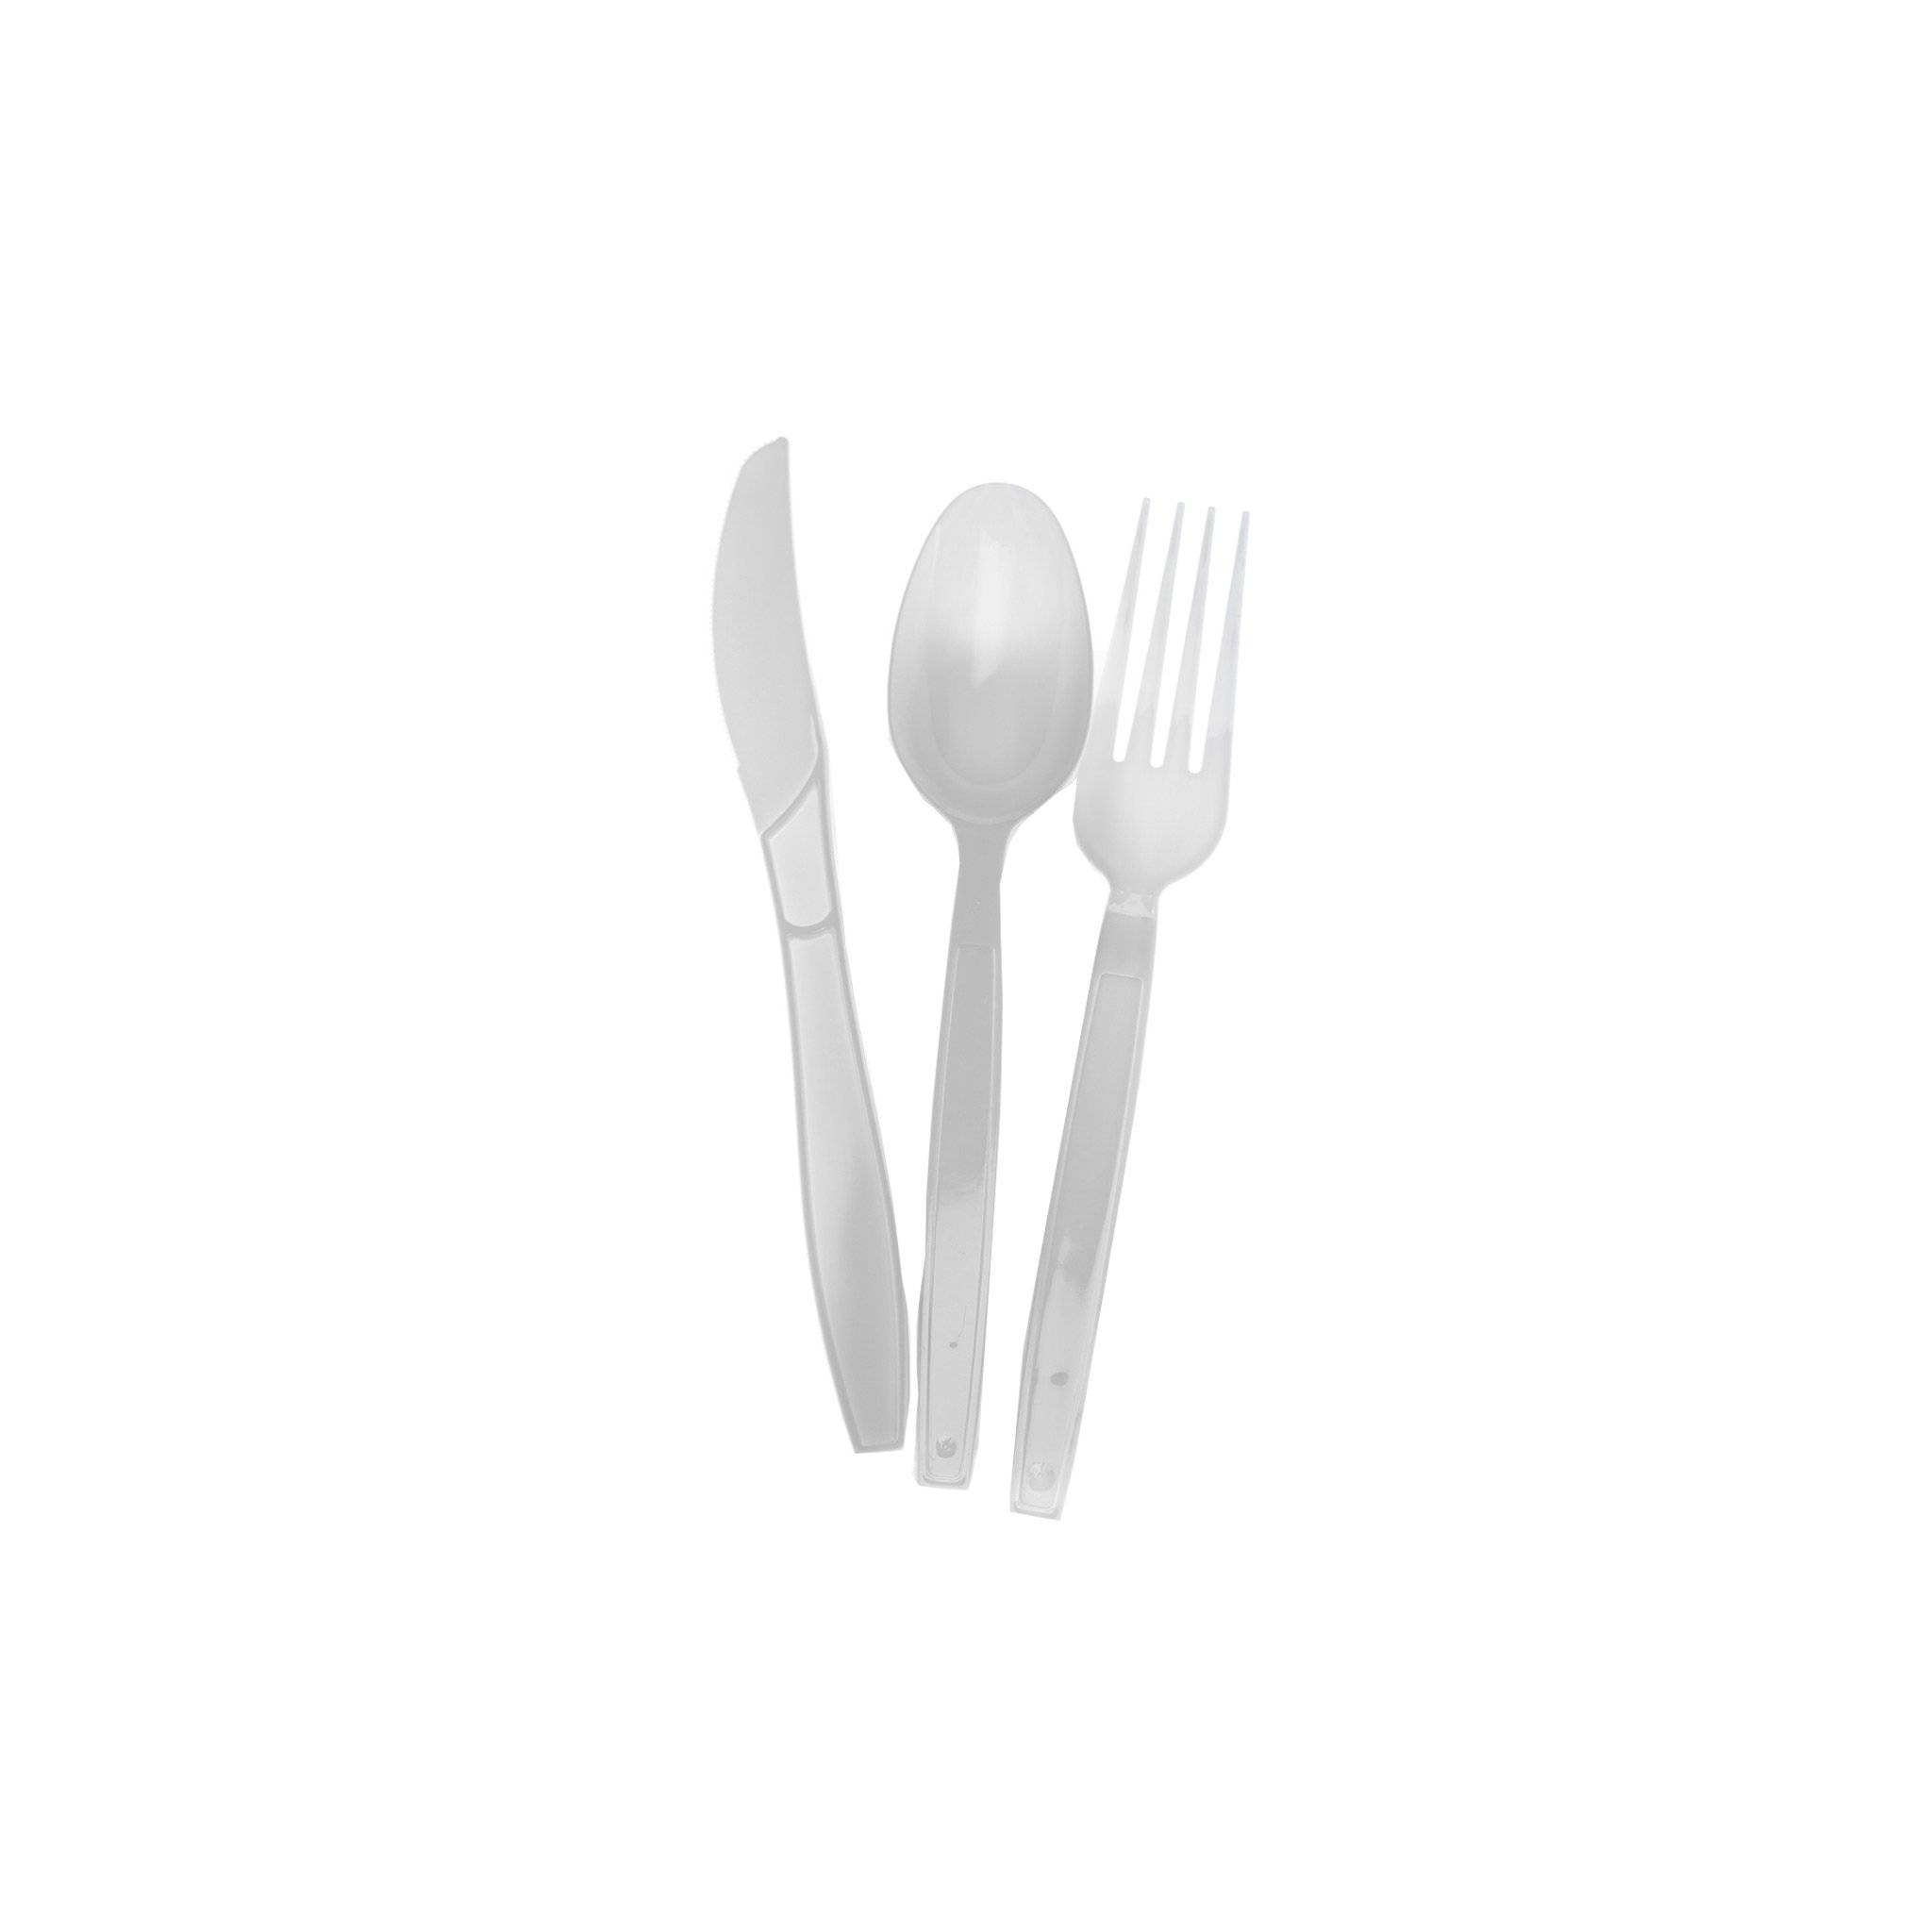 Hotpack | Light Duty White Cutlery Set (Spoon/Fork/Knife/Napkin) | 500 Pieces - Hotpack Global